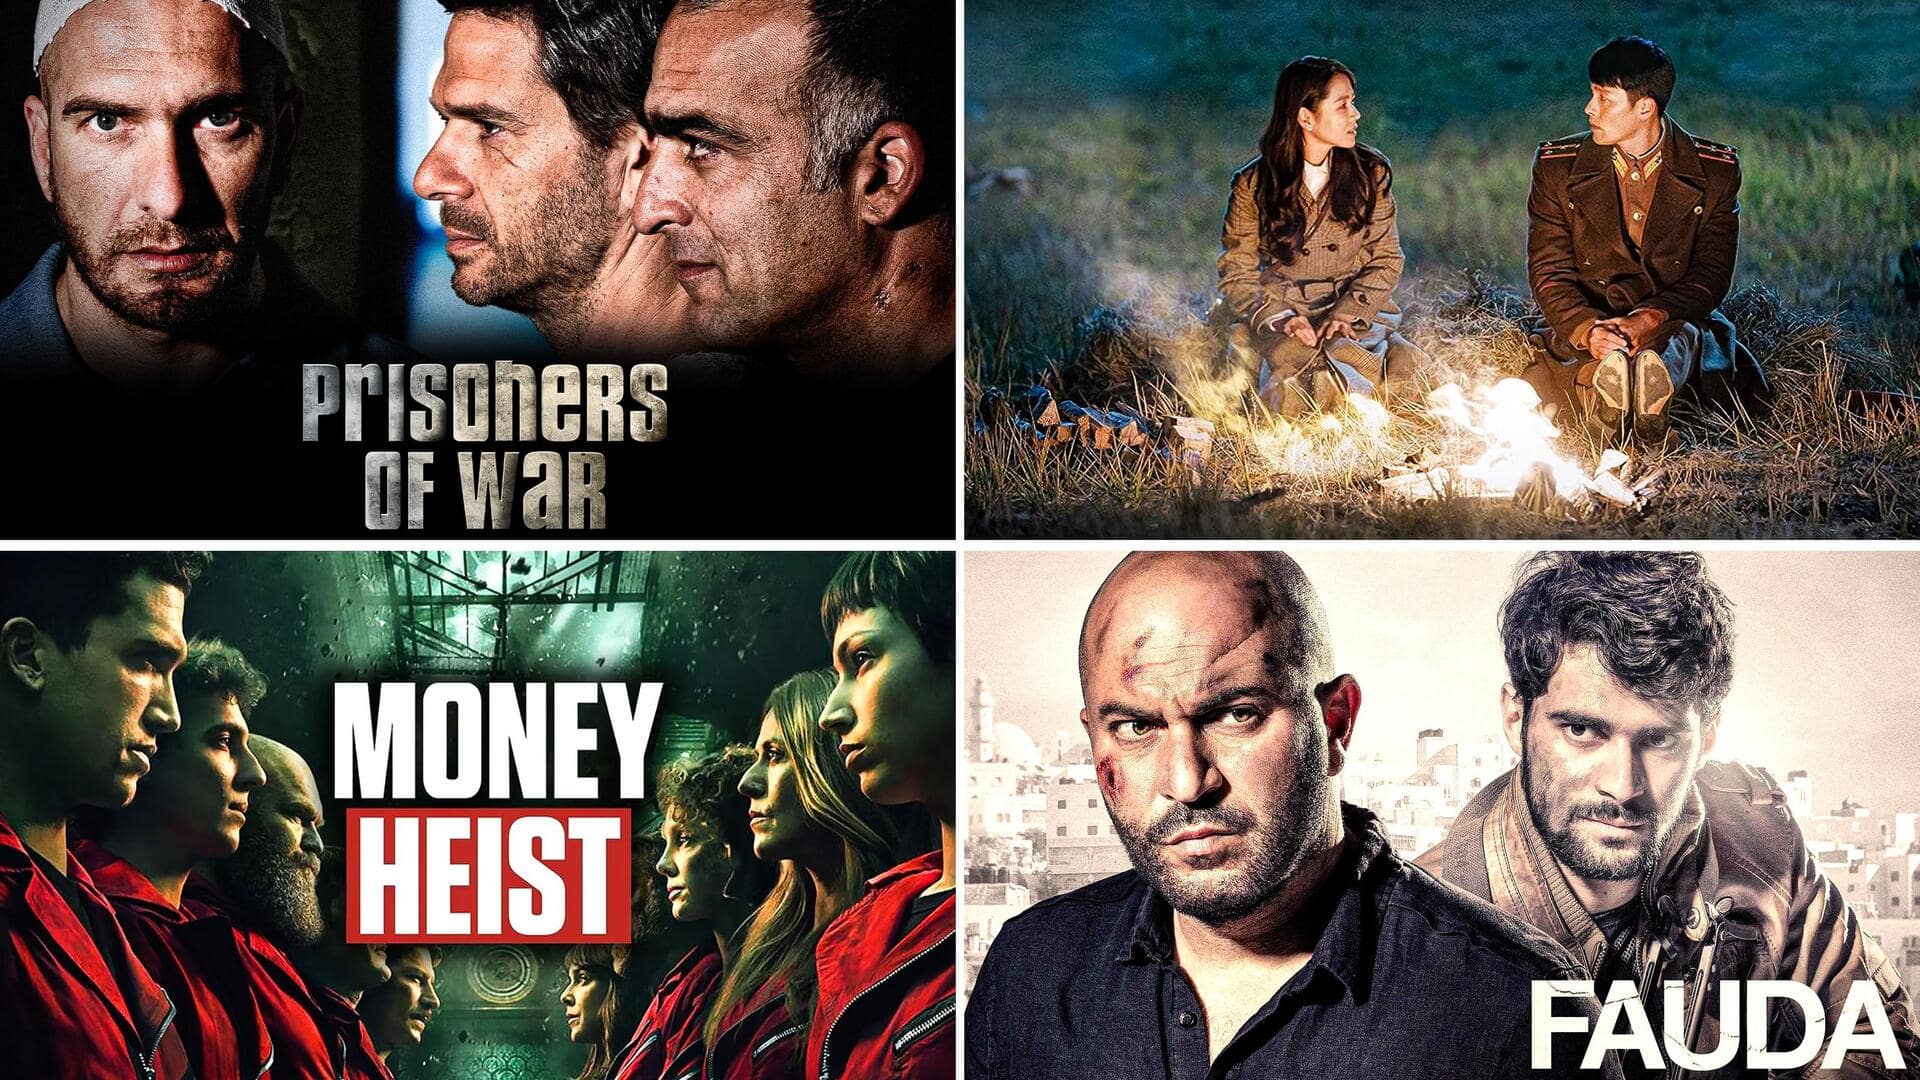 'Fauda' to 'Money Heist': Best foreign TV shows